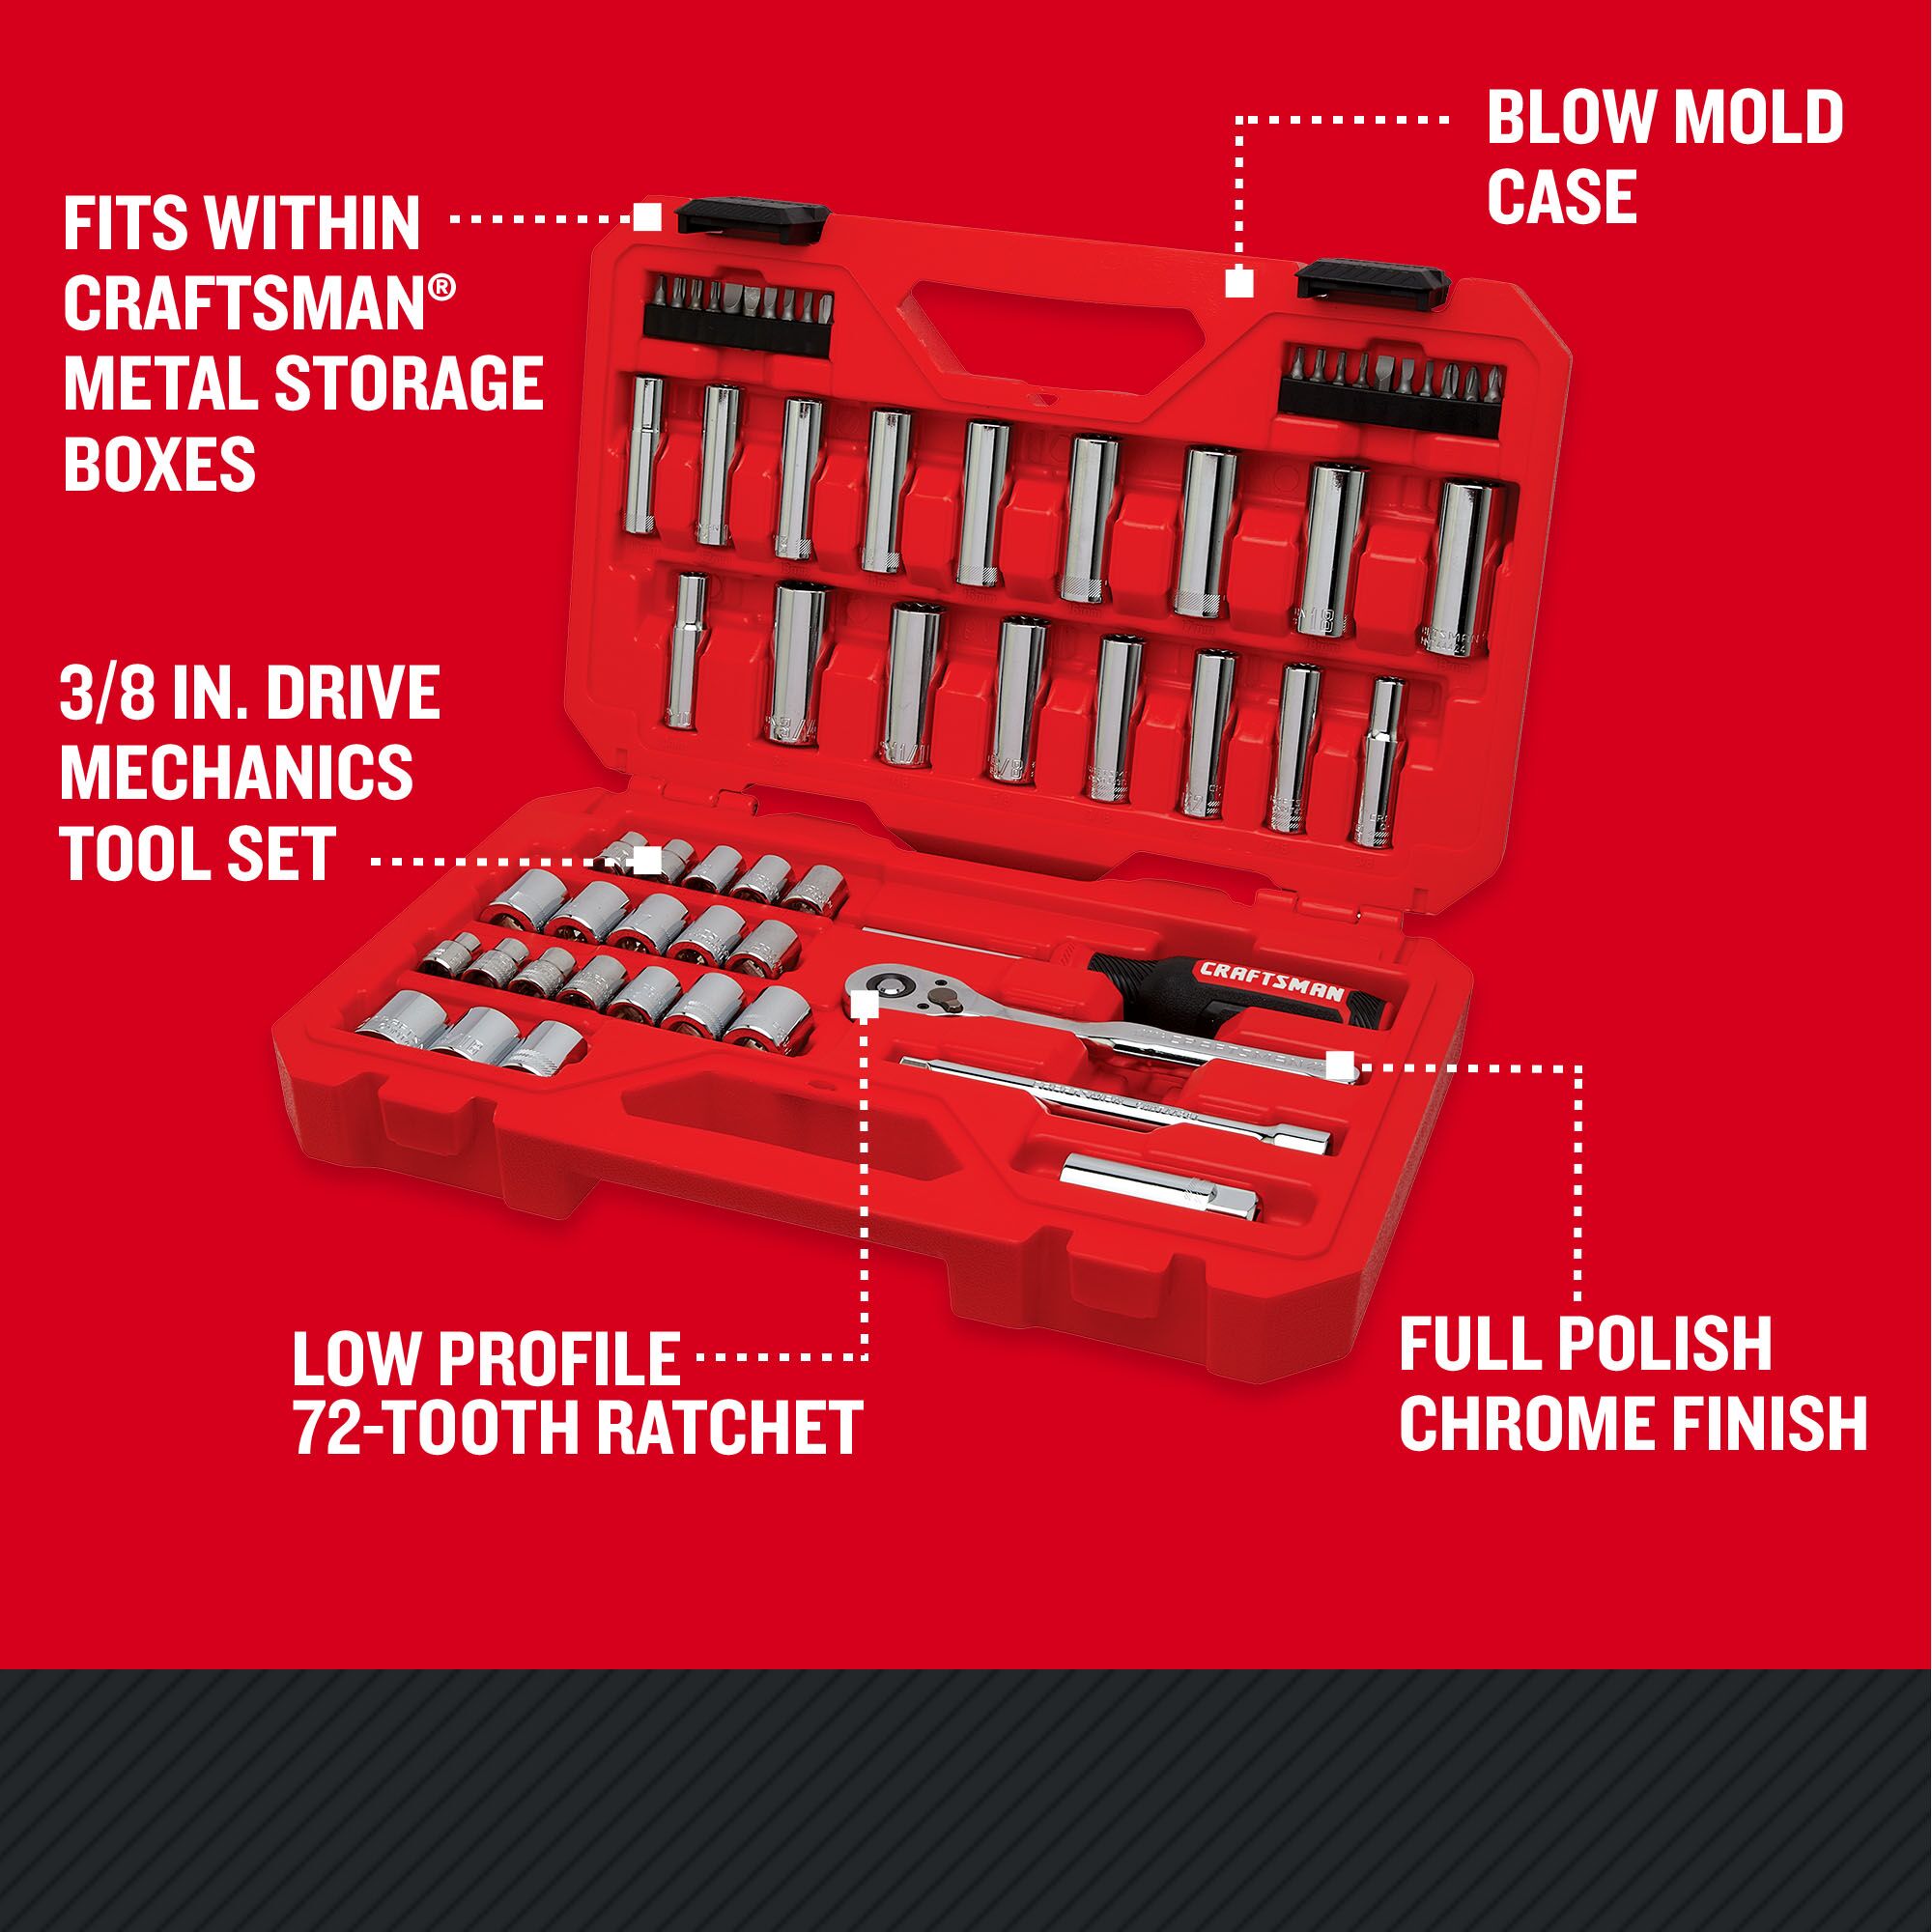 CRAFTSMAN Low Profile 61 piece 3/8 inch drive MECHANICS TOOL SET with features and benefits highlighted